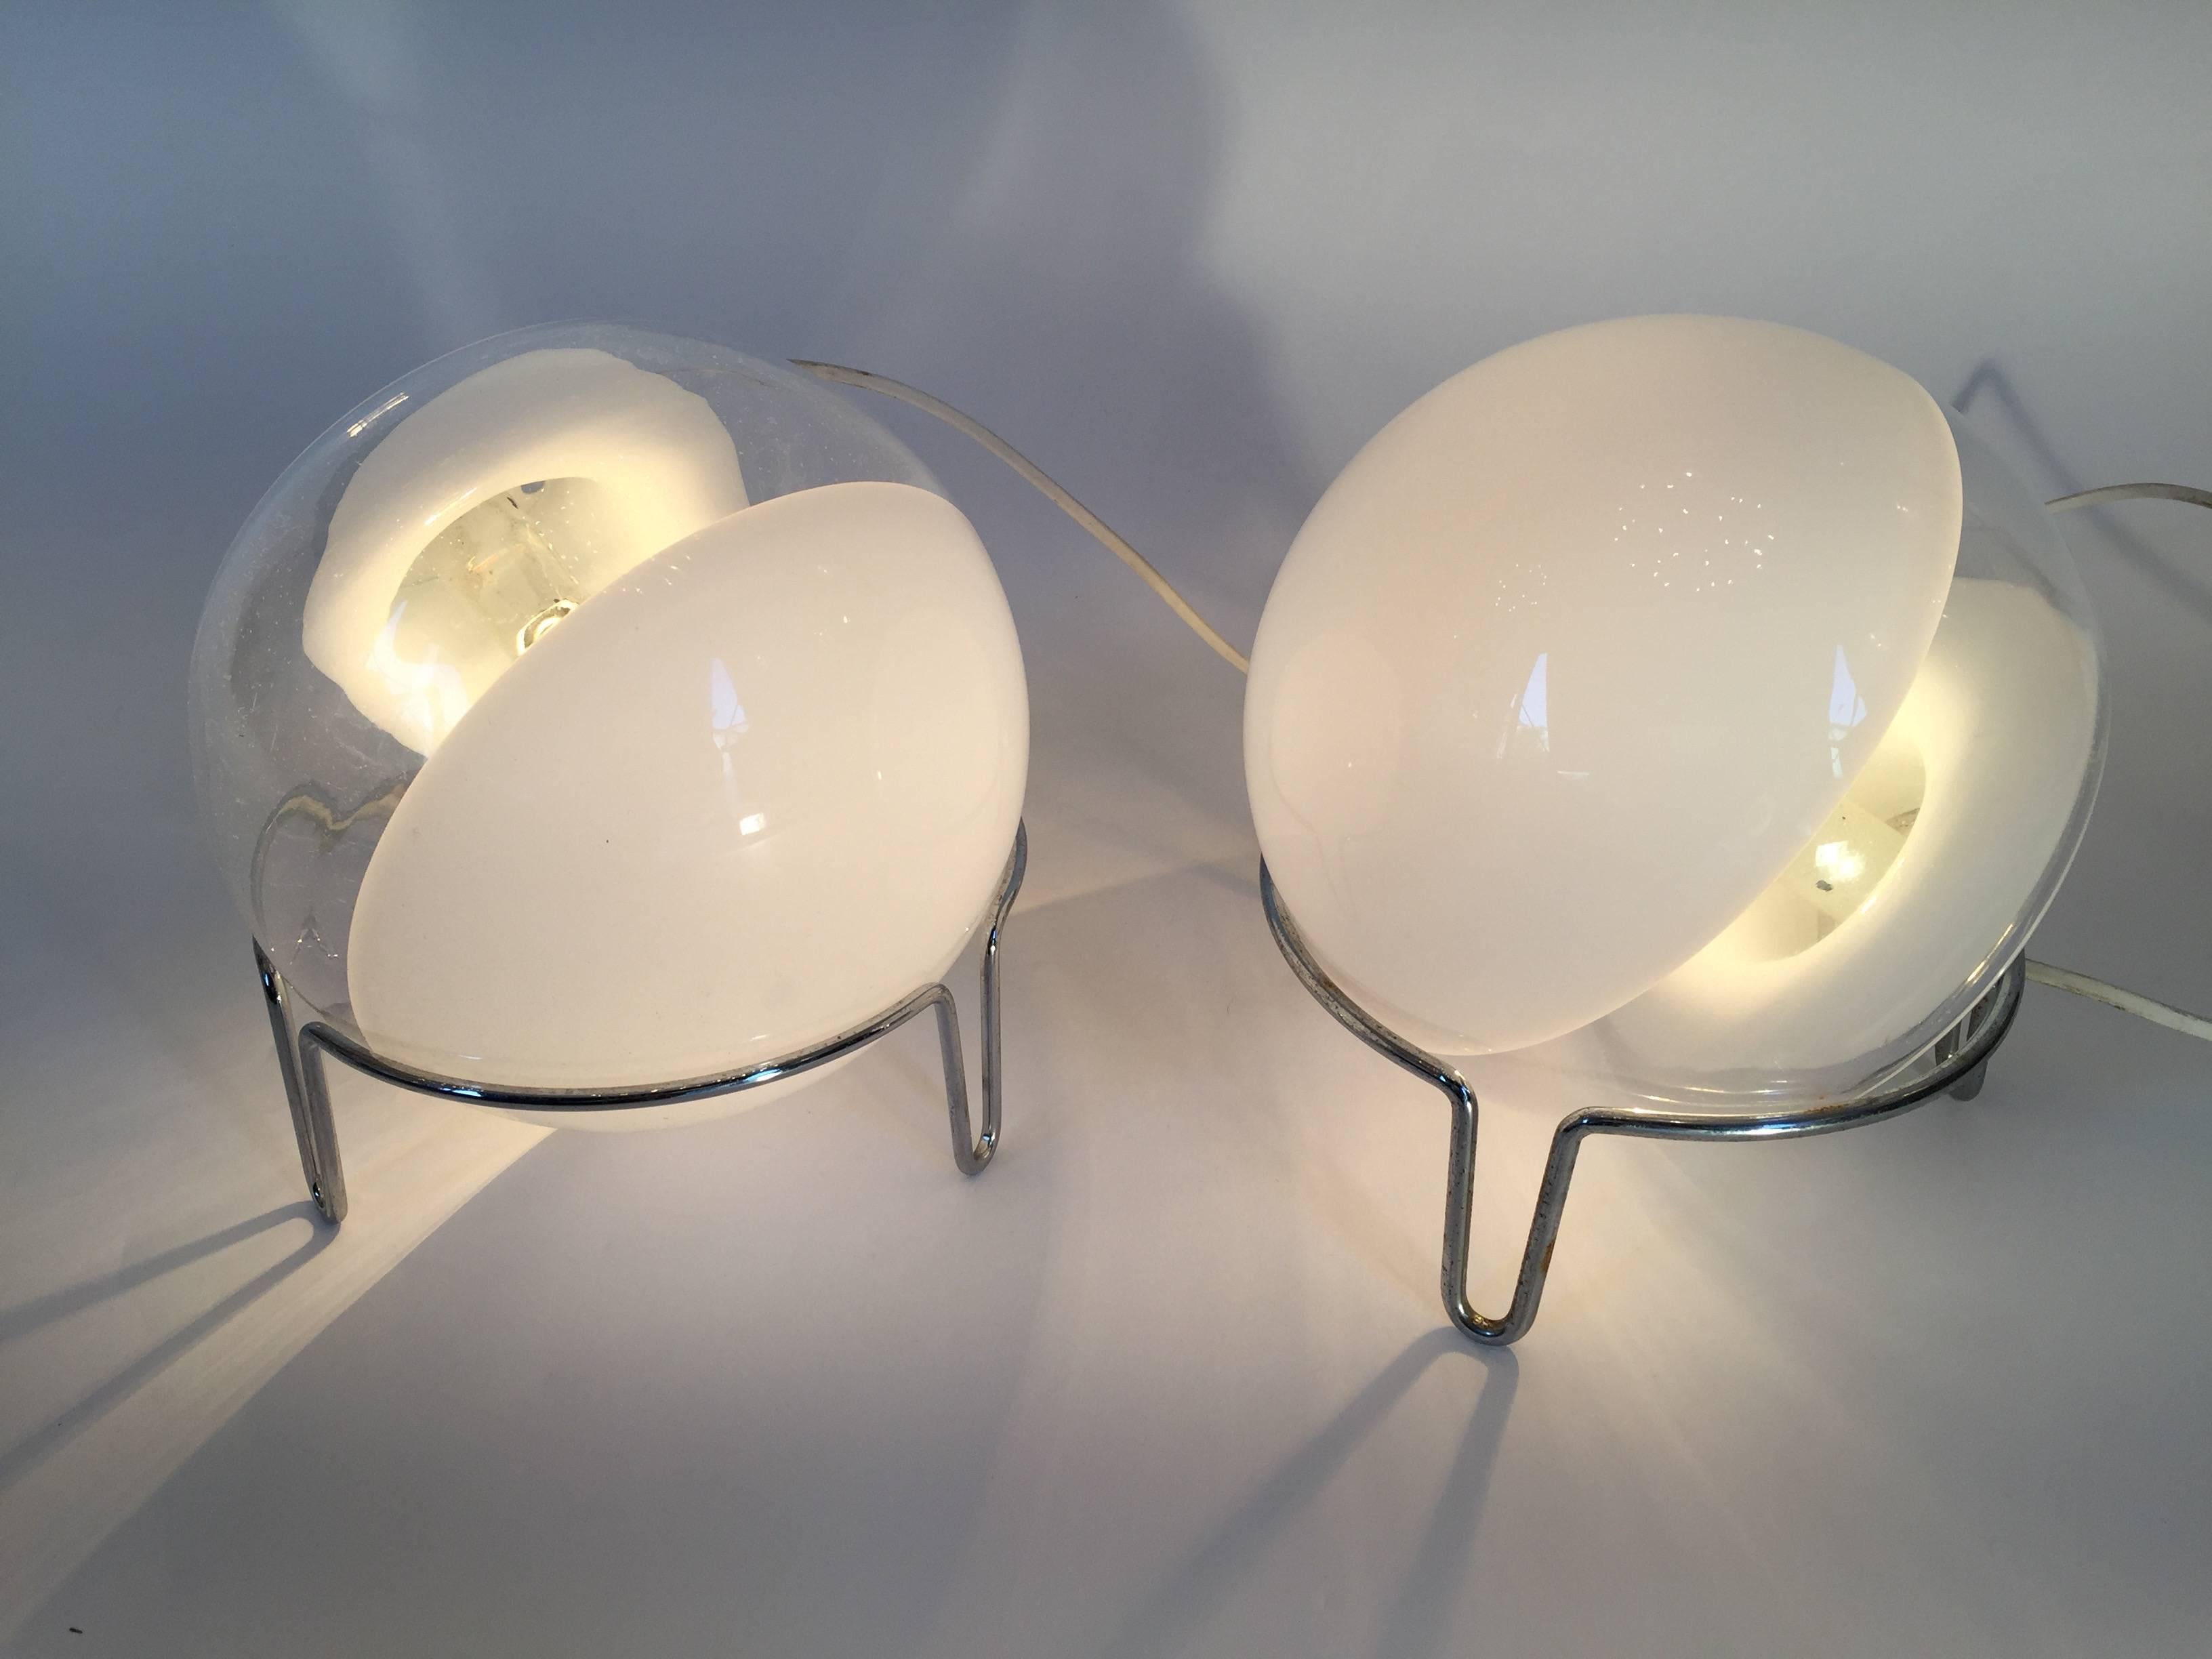 Mid-Century Modern or Space Age pair of bowl table or bedside lamps by the designer Angelo Mangiarotti for the editor Skipper. White Murano blown glass and metal chrome base. The lamps are positioned in all directions. Famous editor and designer